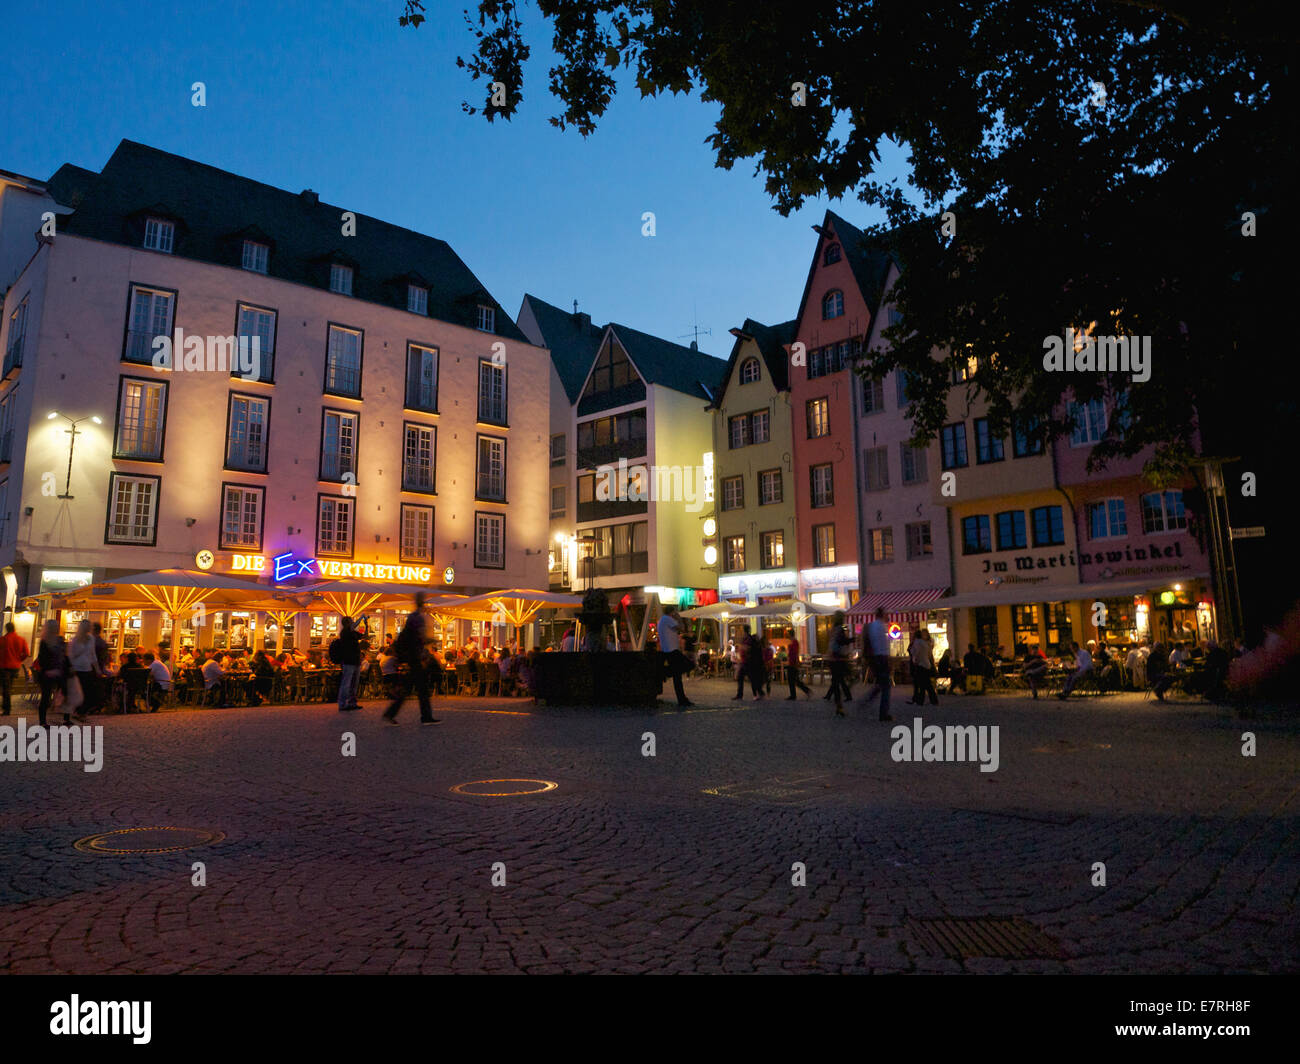 Fischmarkt fish market square in the historic city center of Cologne, Germany, at night Stock Photo